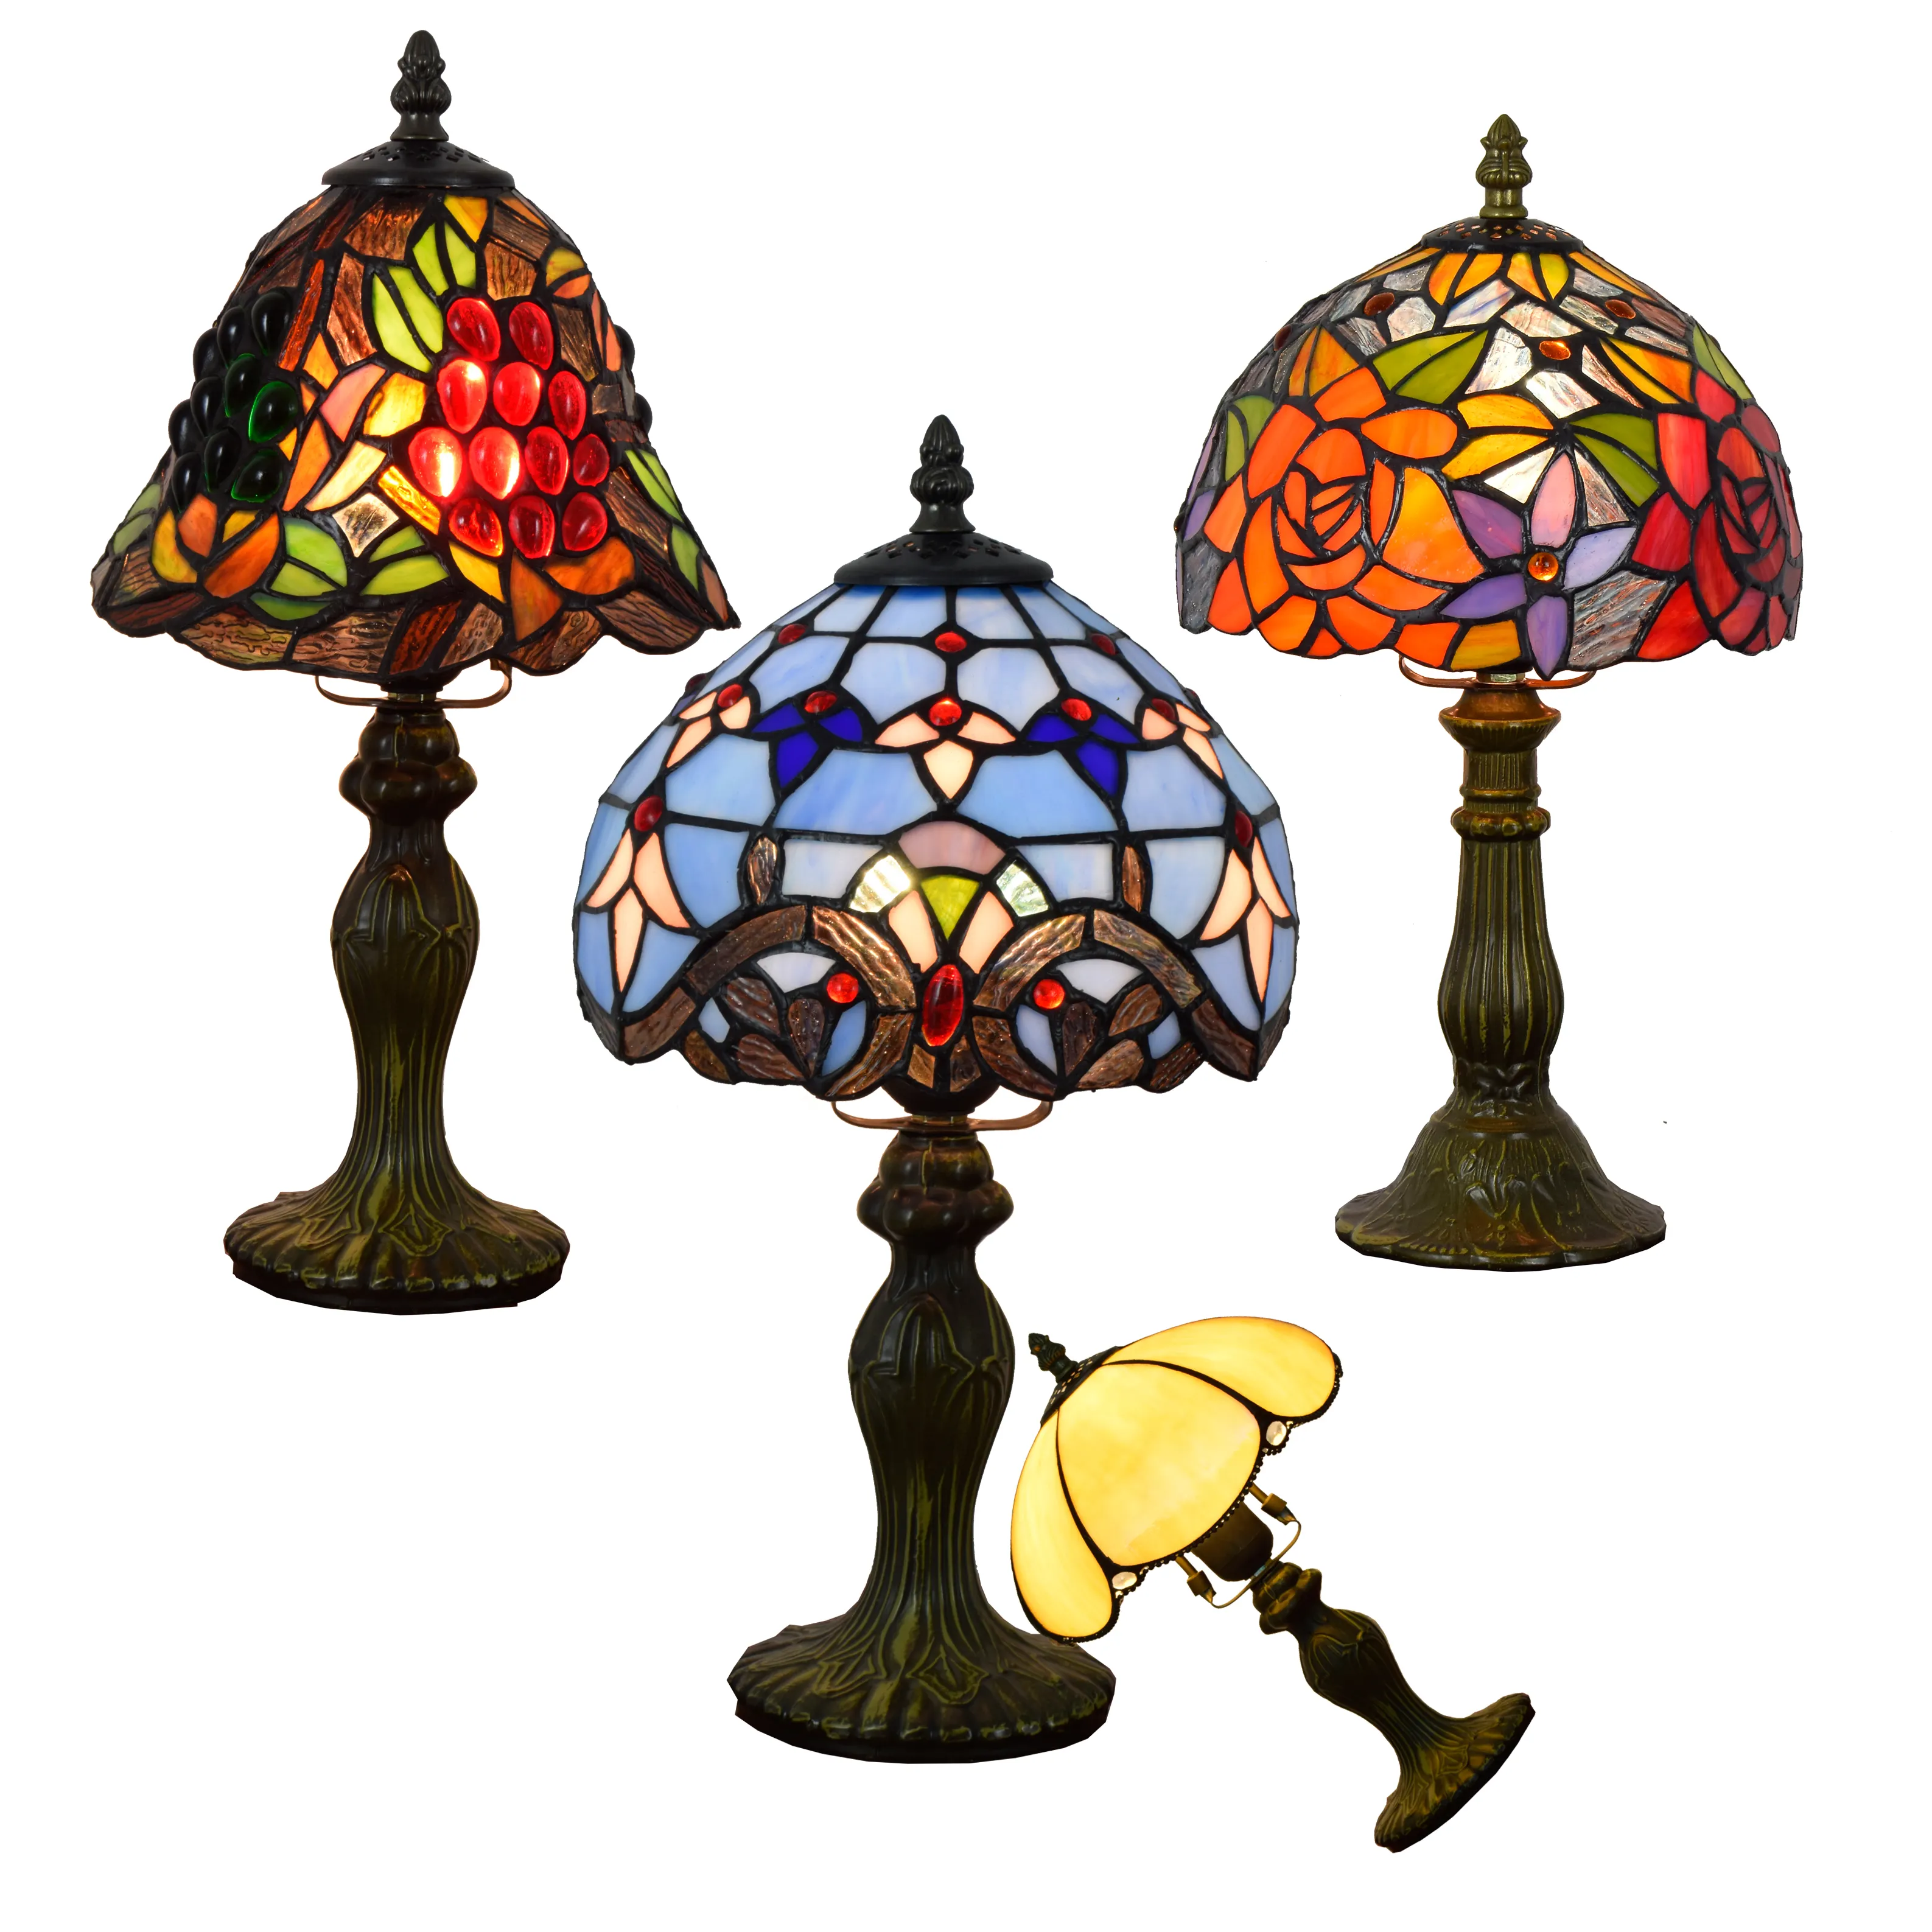 8 inch Retro creativity stained glass lampen bedside desk lamp bar study roses Baroque grapes night light tiffany table lamps